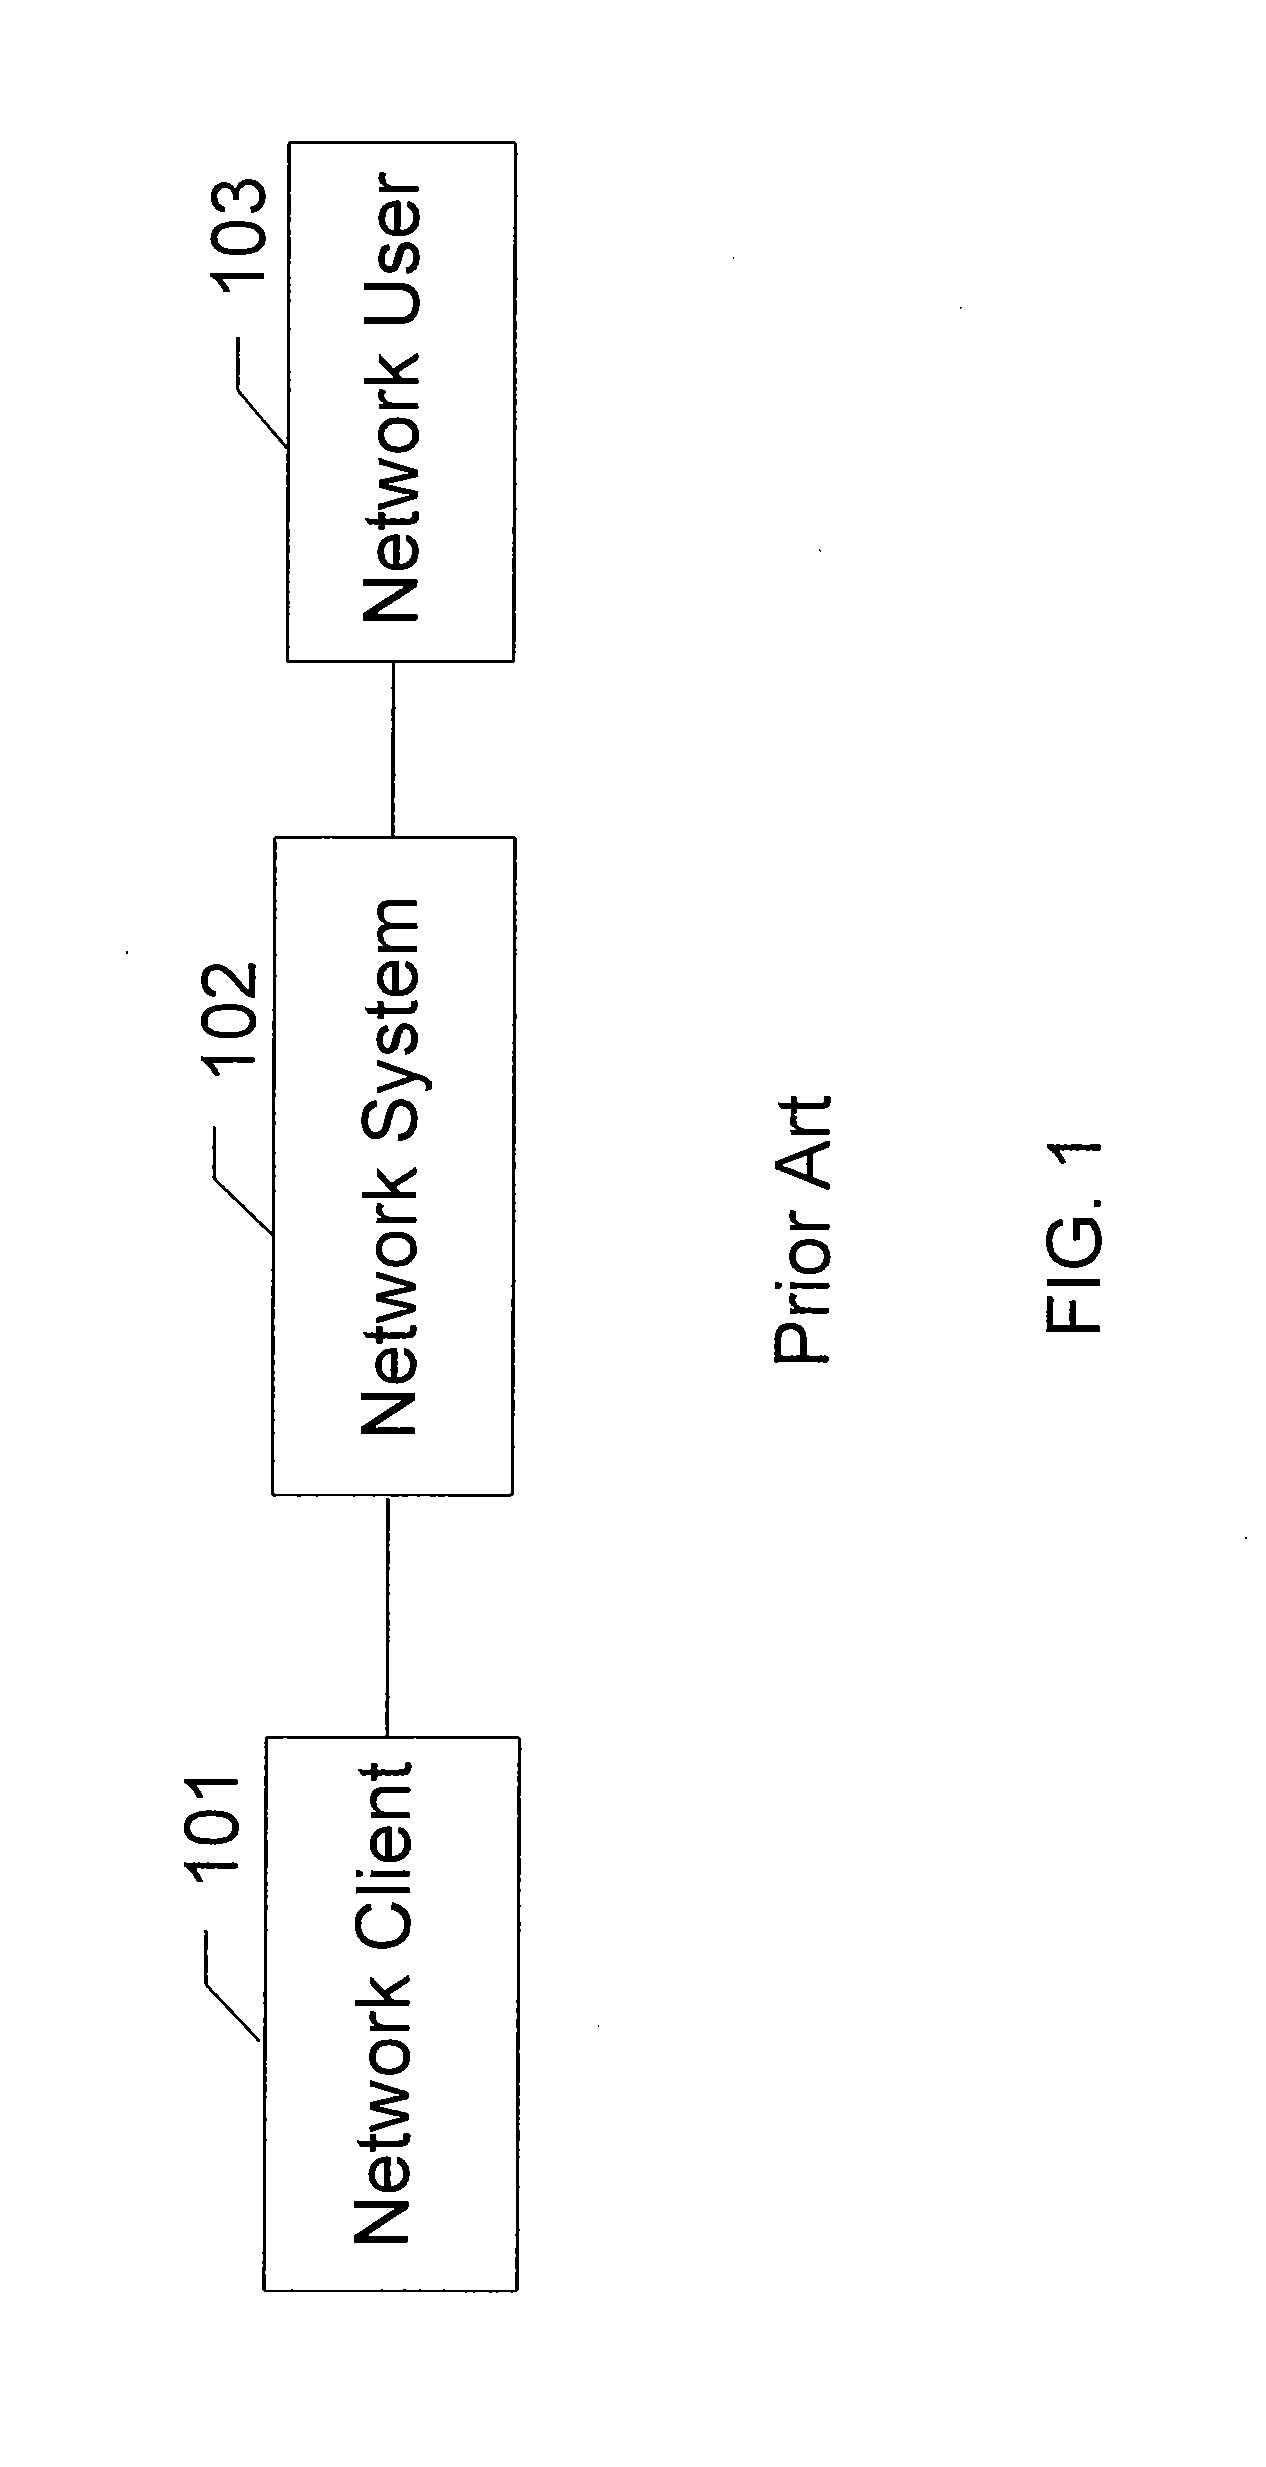 Method of sending location service request in mobile communication network